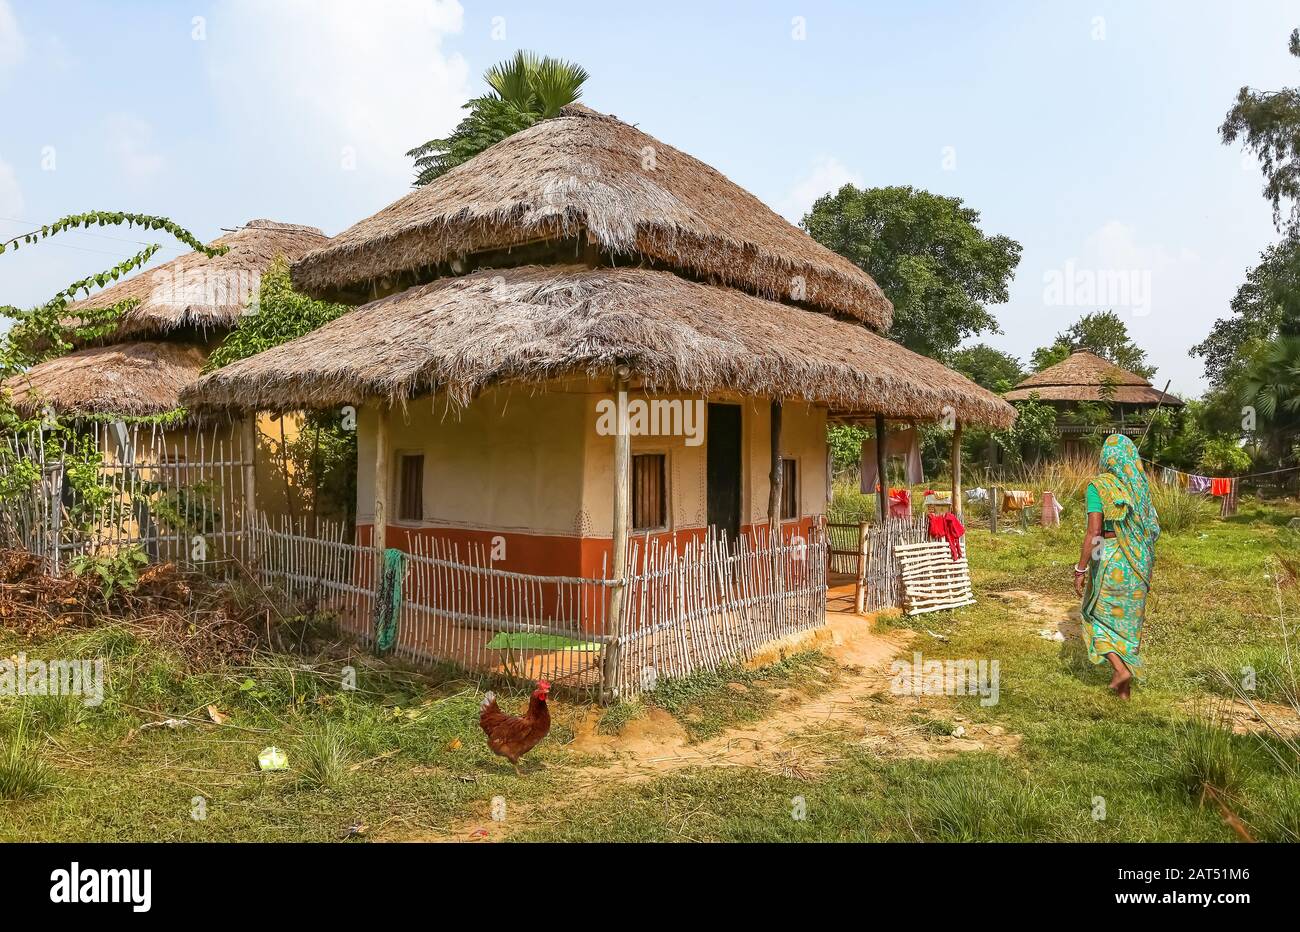 Rural Indian woman near her mud hut with beautiful village scene near Bolpur West Bengal, India Stock Photo